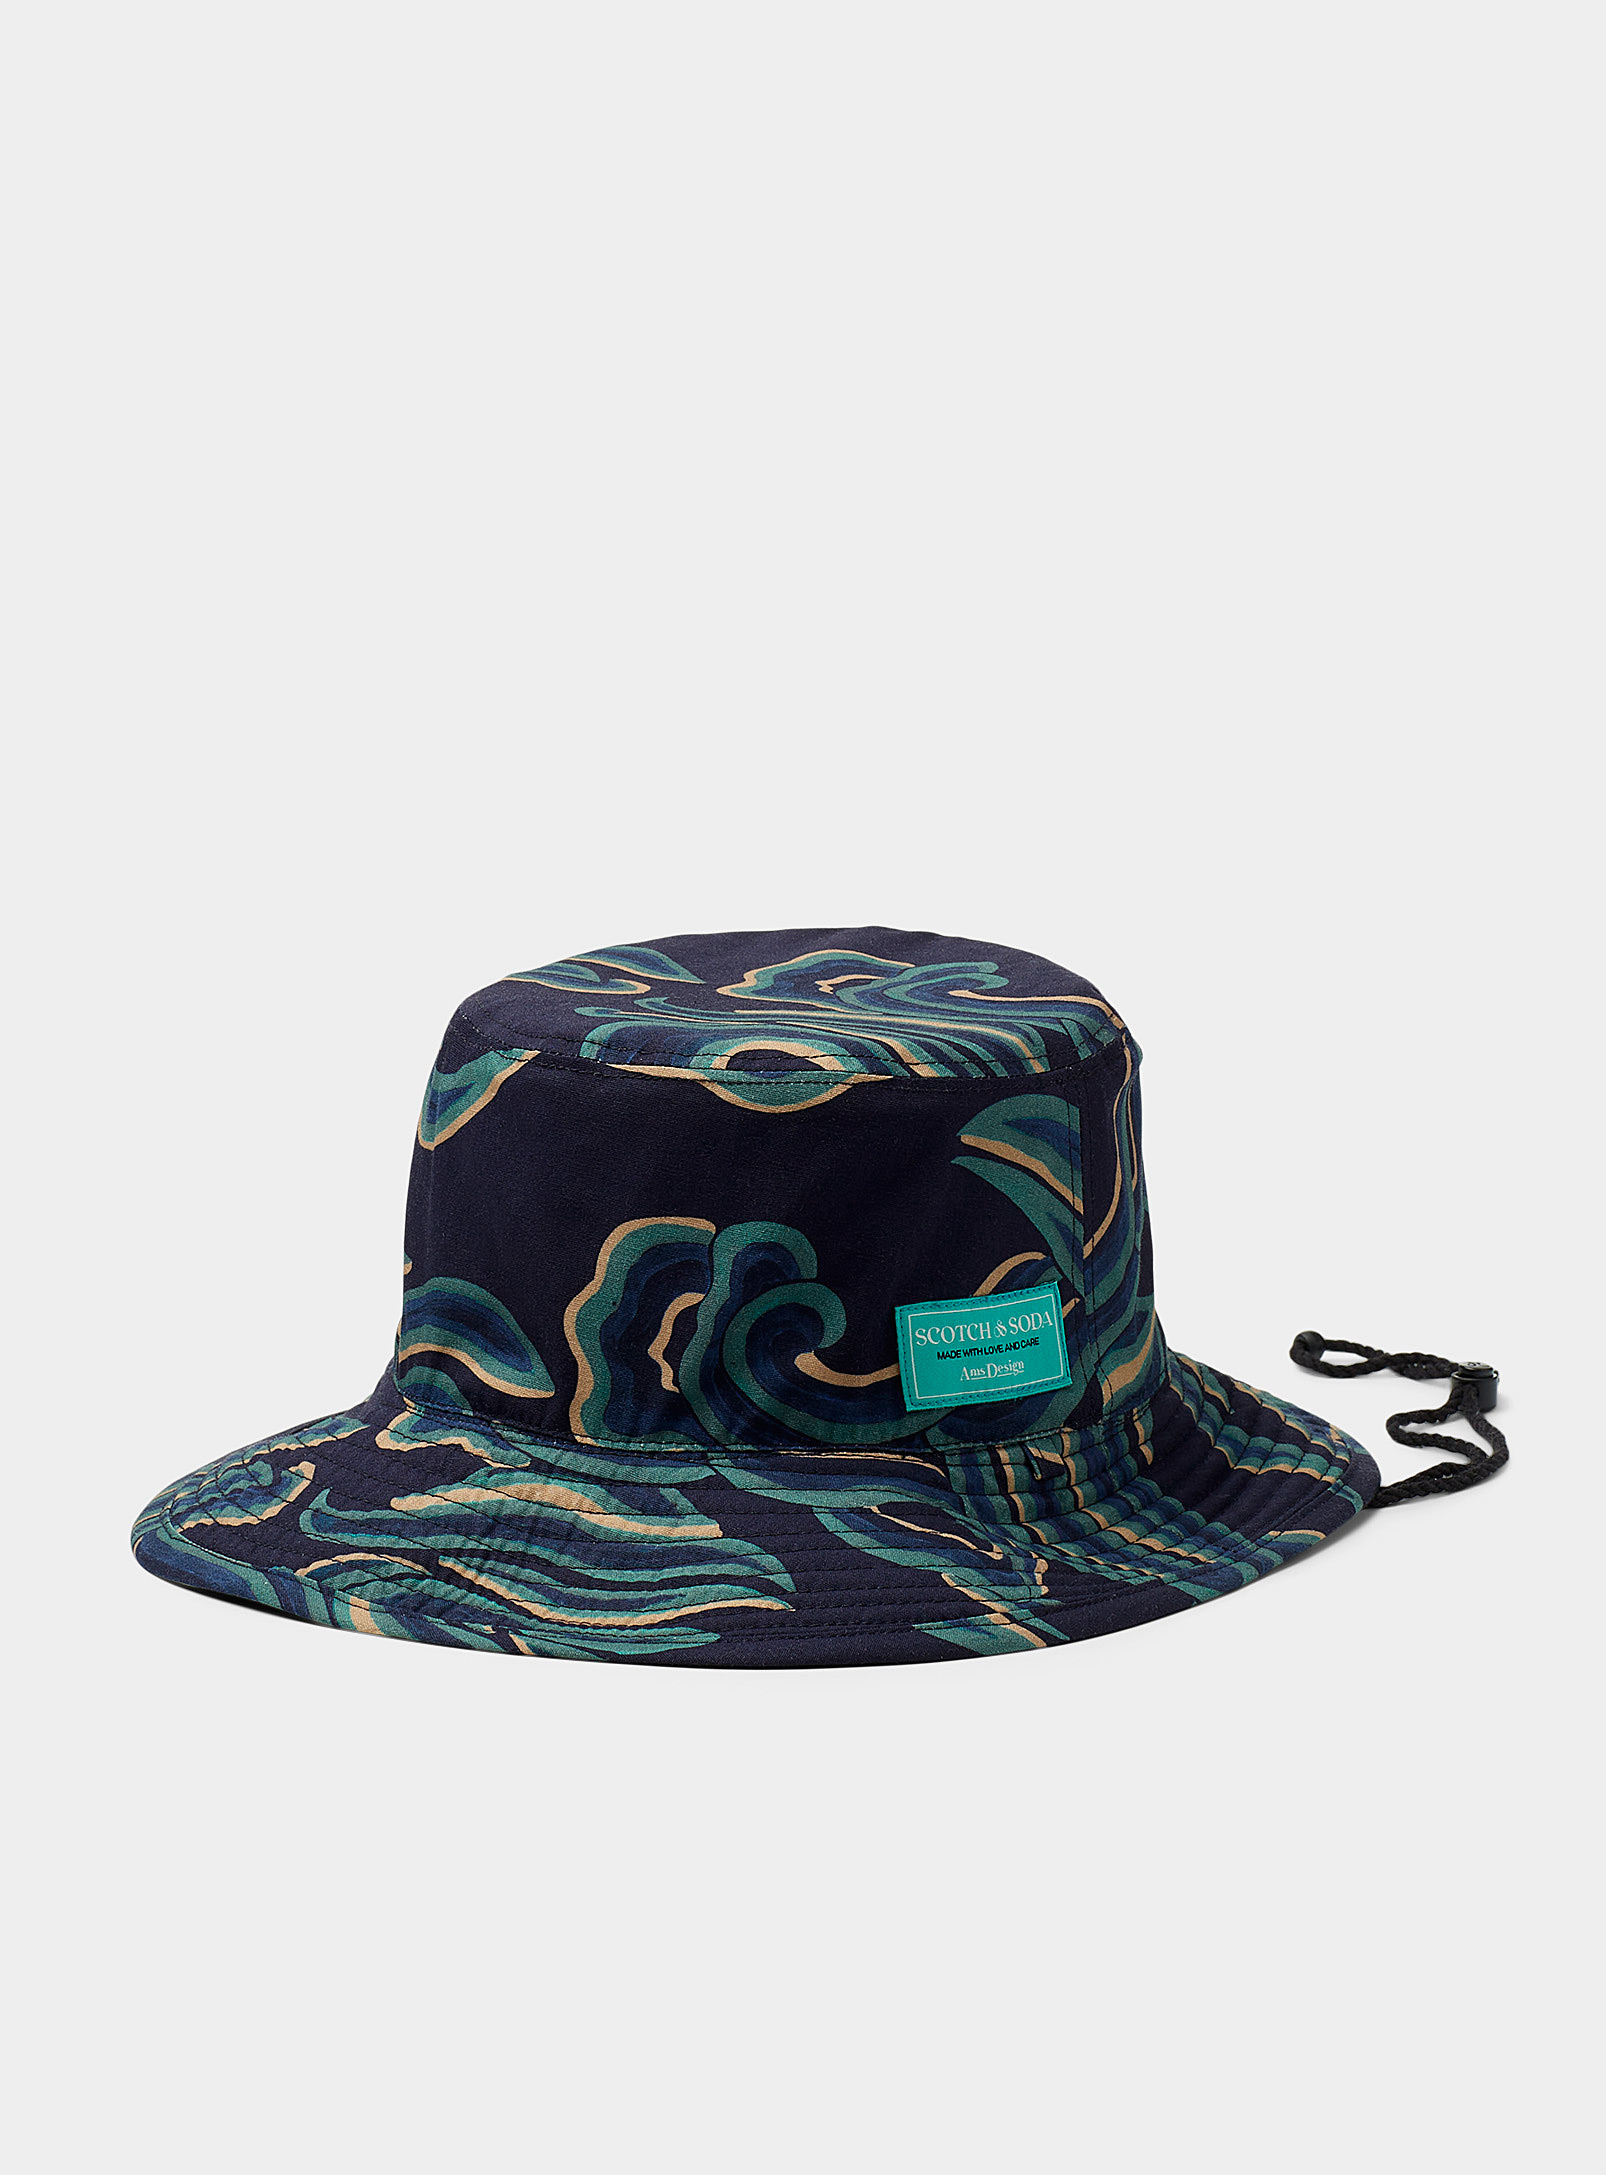 Scotch & Soda Reversible Abstract Foliage Bucket Hat In Patterned Blue